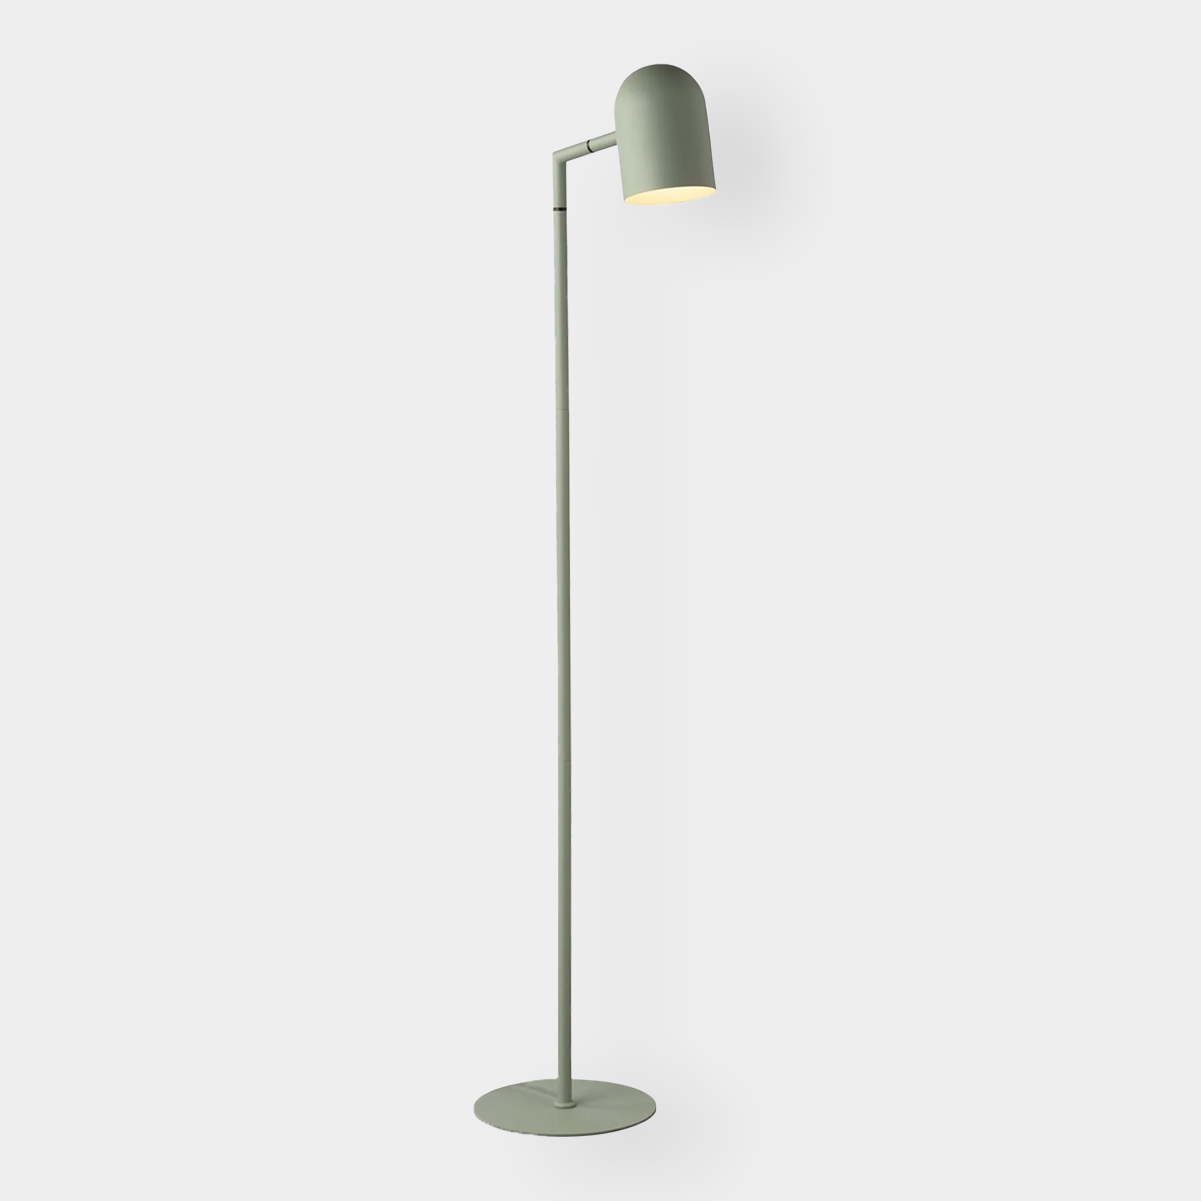 Overall Floor Lamp Sylish Elegant and Modern Floor Lamp Design for Any Room